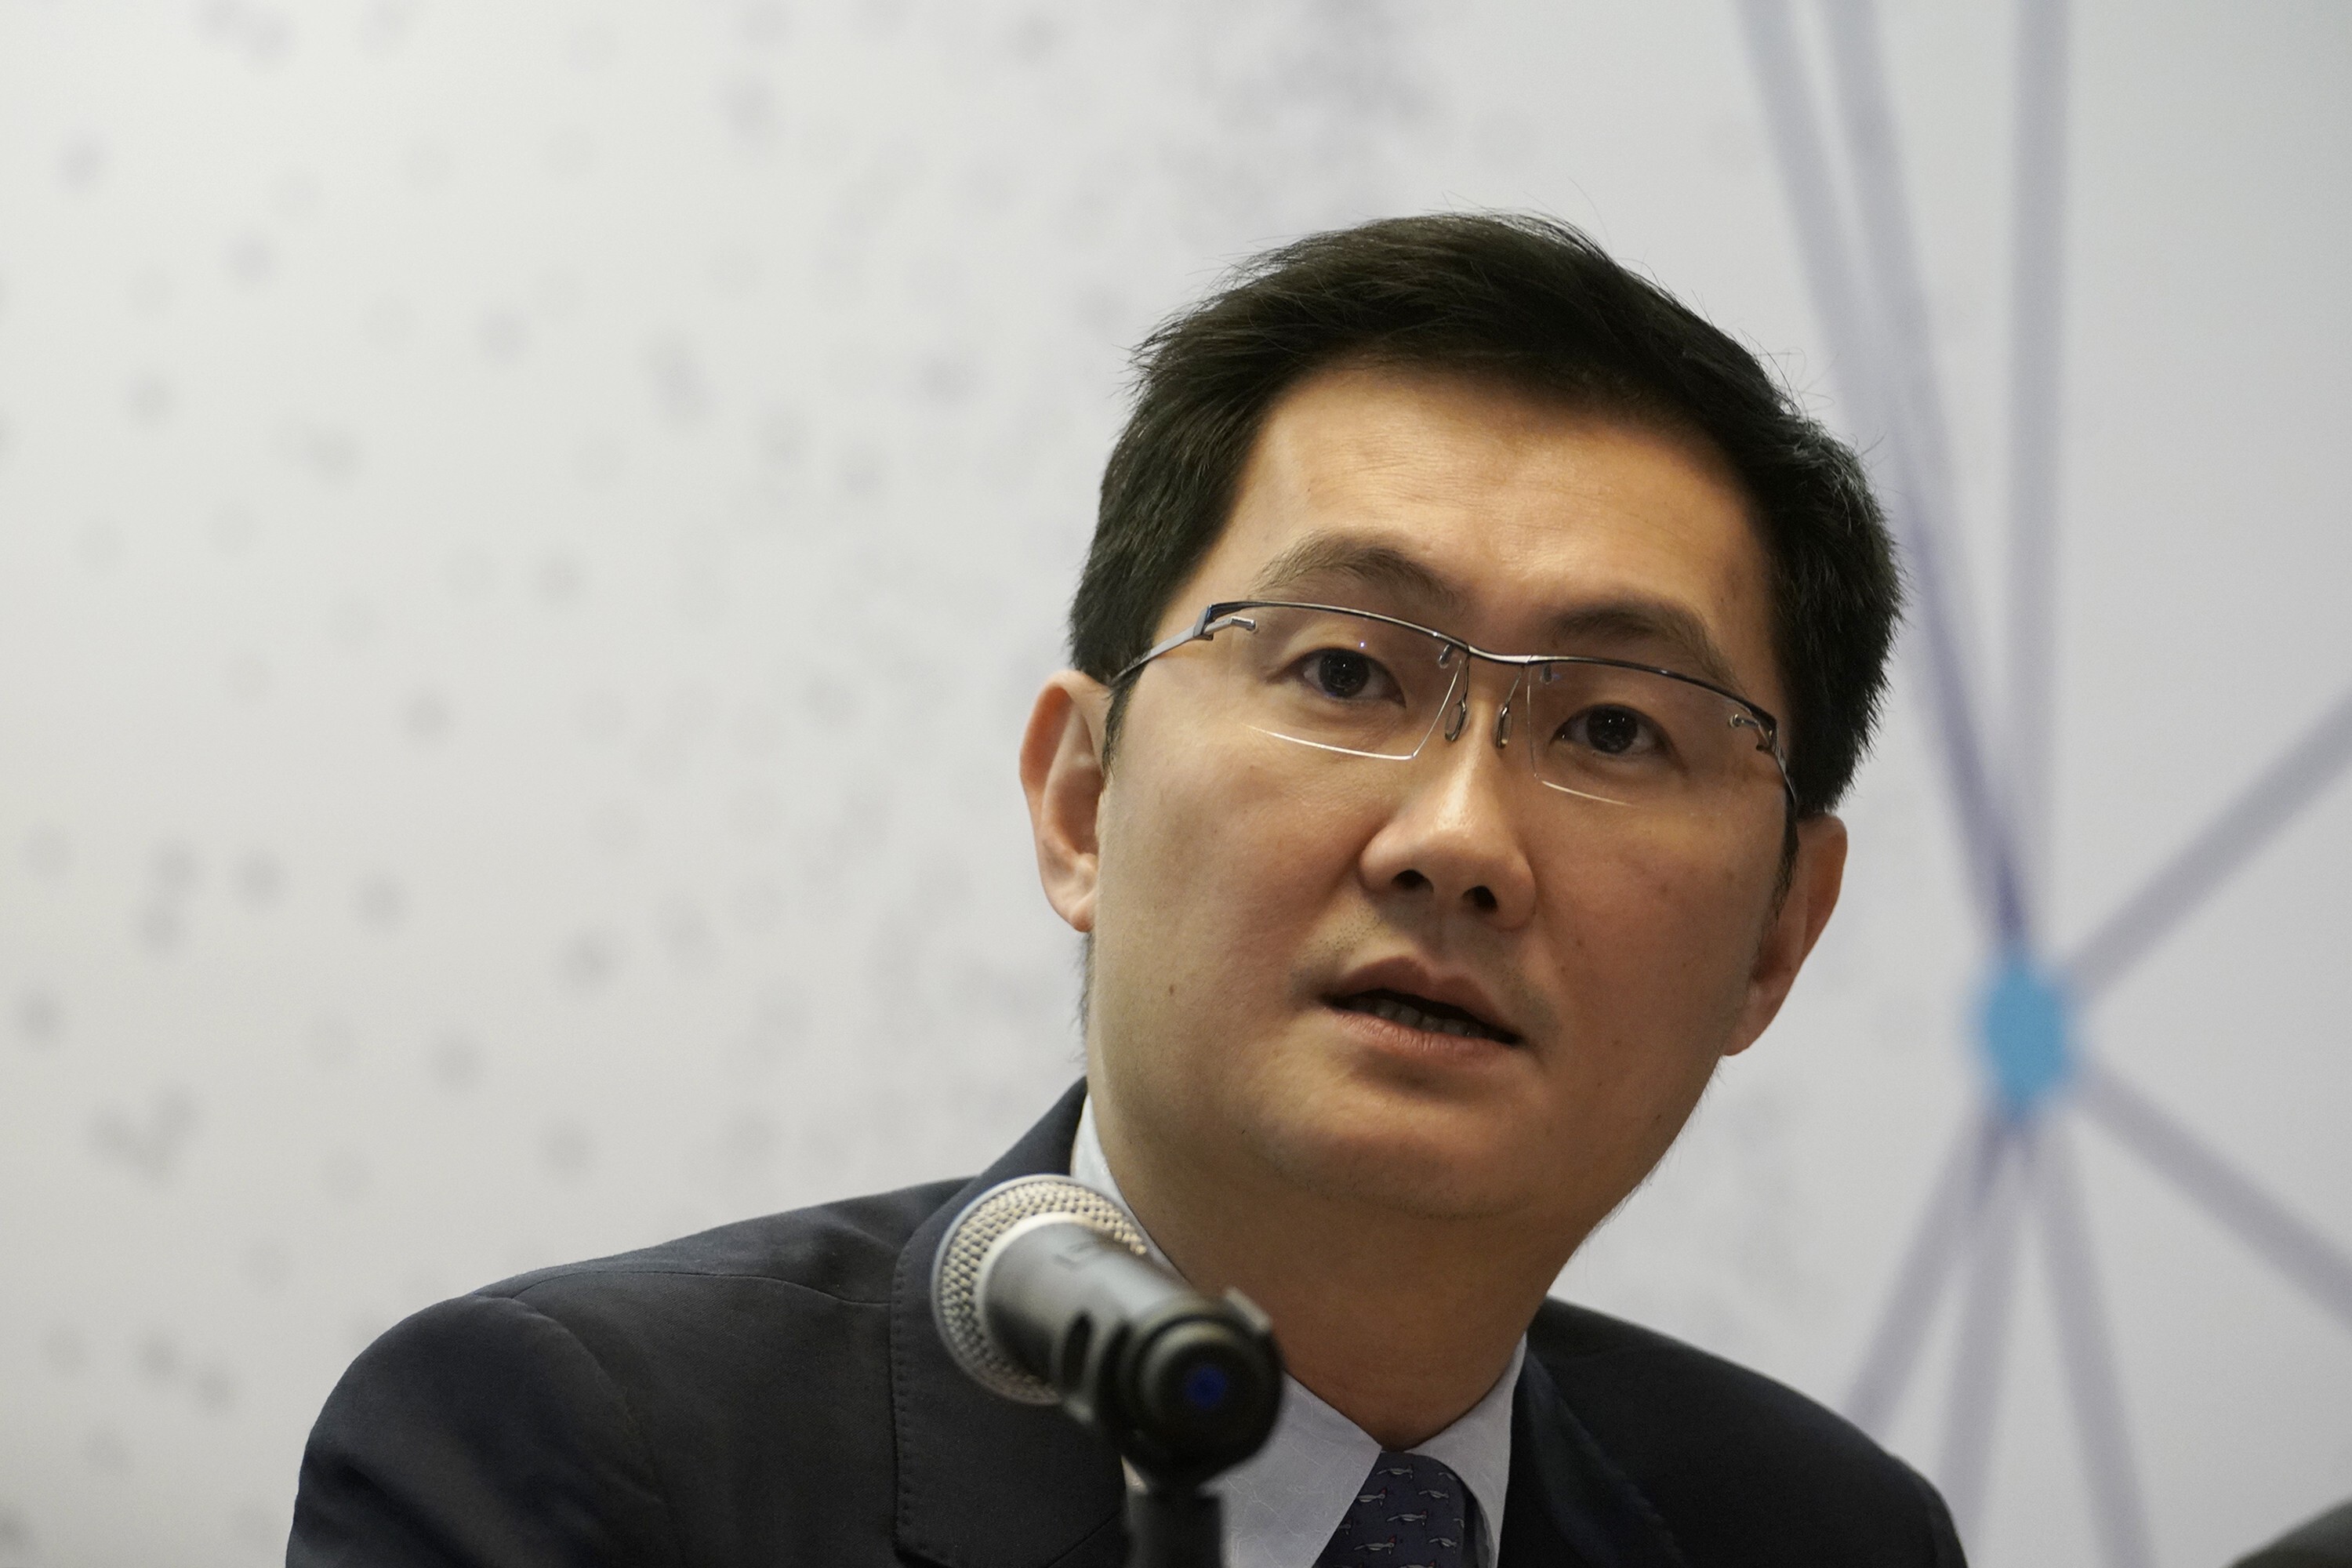 Pony Ma Huateng, chairman and CEO of Tencent Holdings, is currently China’s second richest person. Photo: Bloomberg